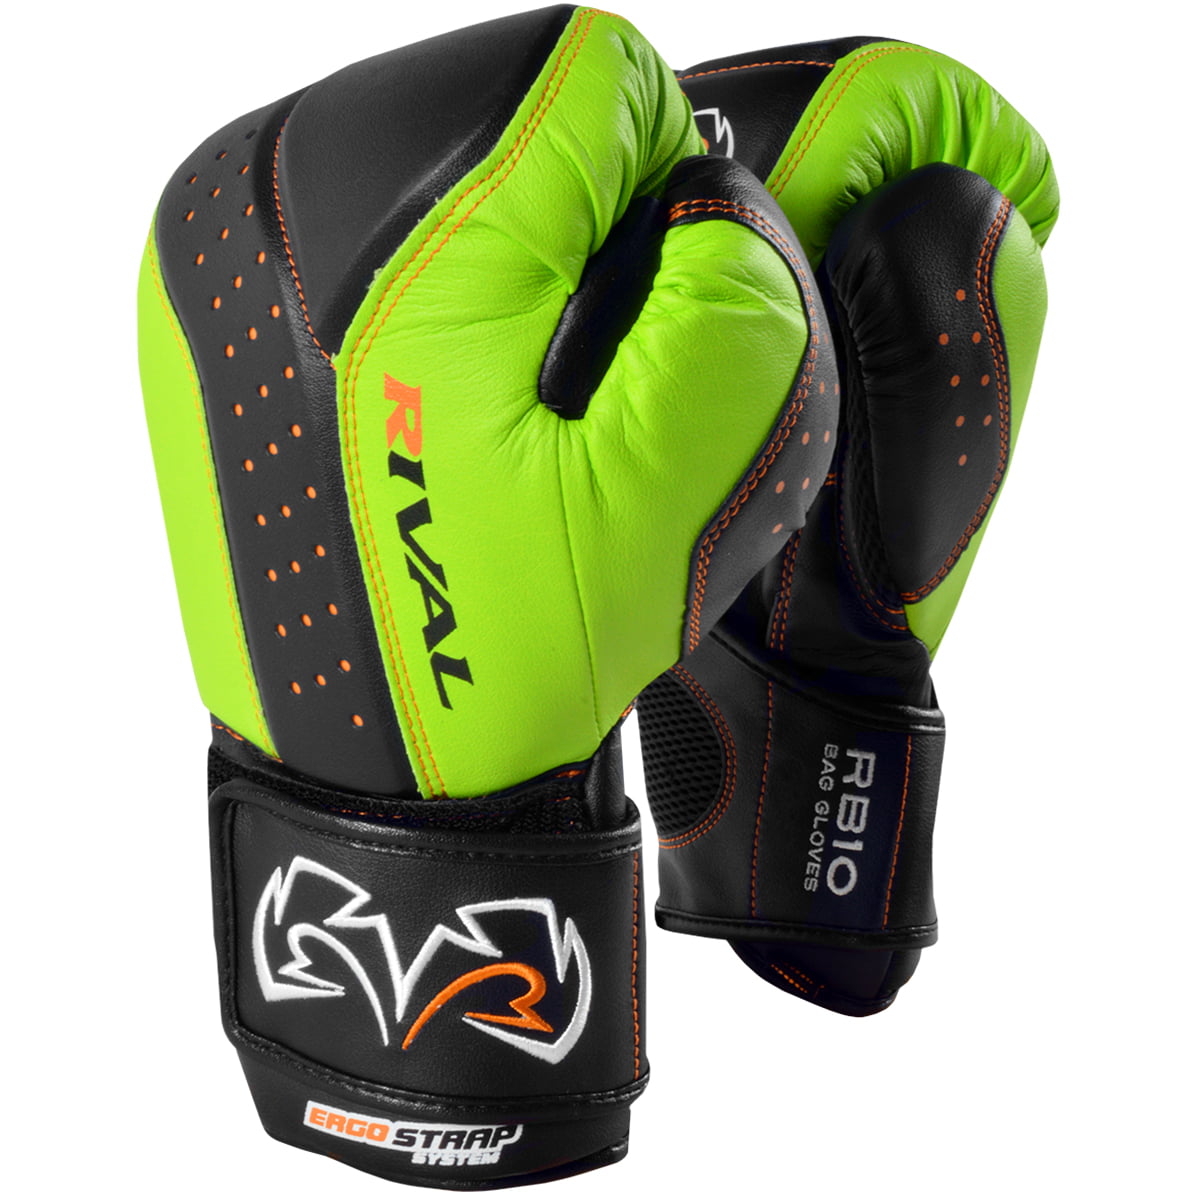 Rival Intelli-Shock Boxing Bag Gloves Adult Pad Gloves Fitness Training Gloves 